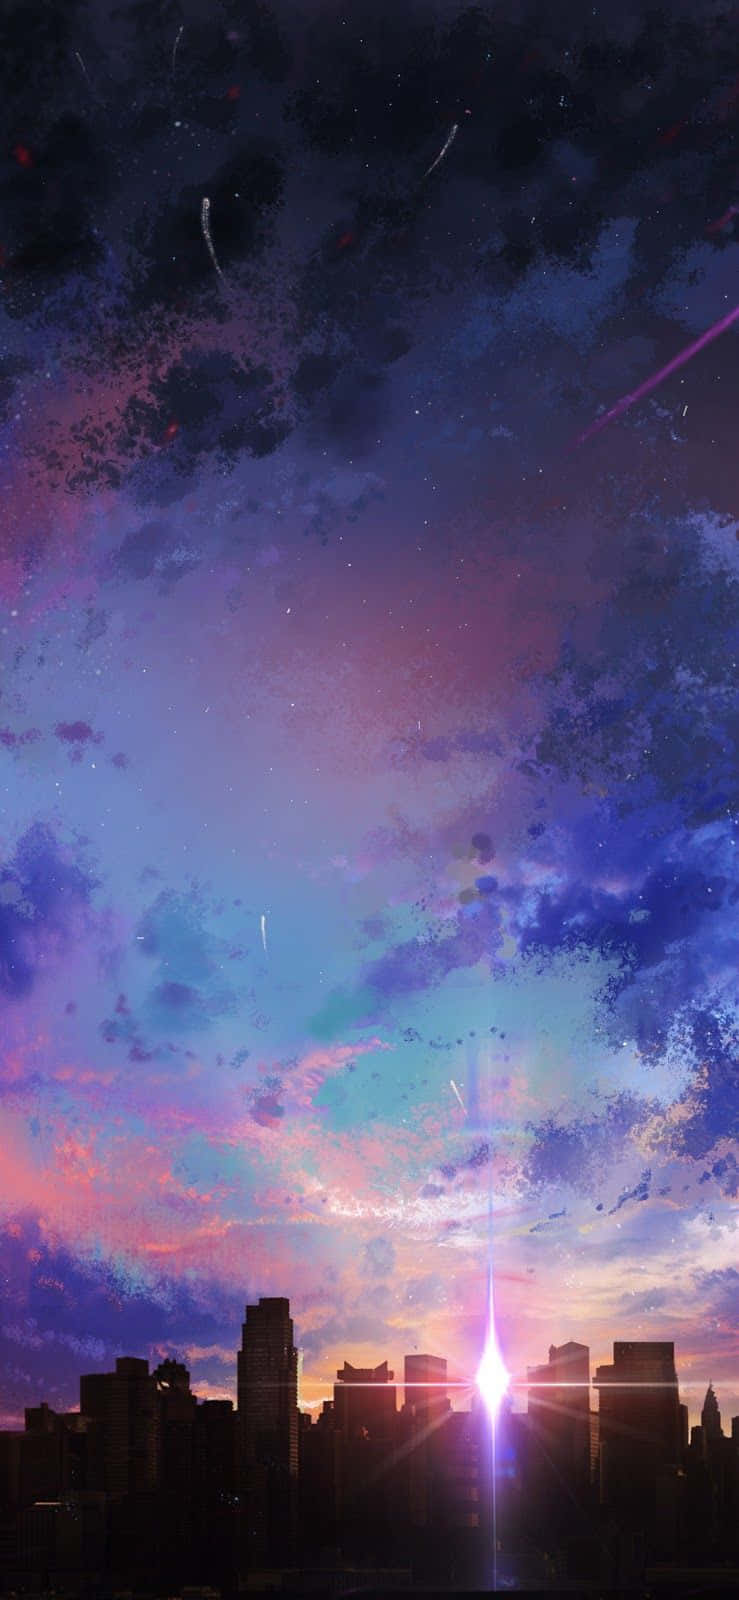 "Take in the beauty of the sunset with this Anime Sunset iPhone wallpaper" Wallpaper